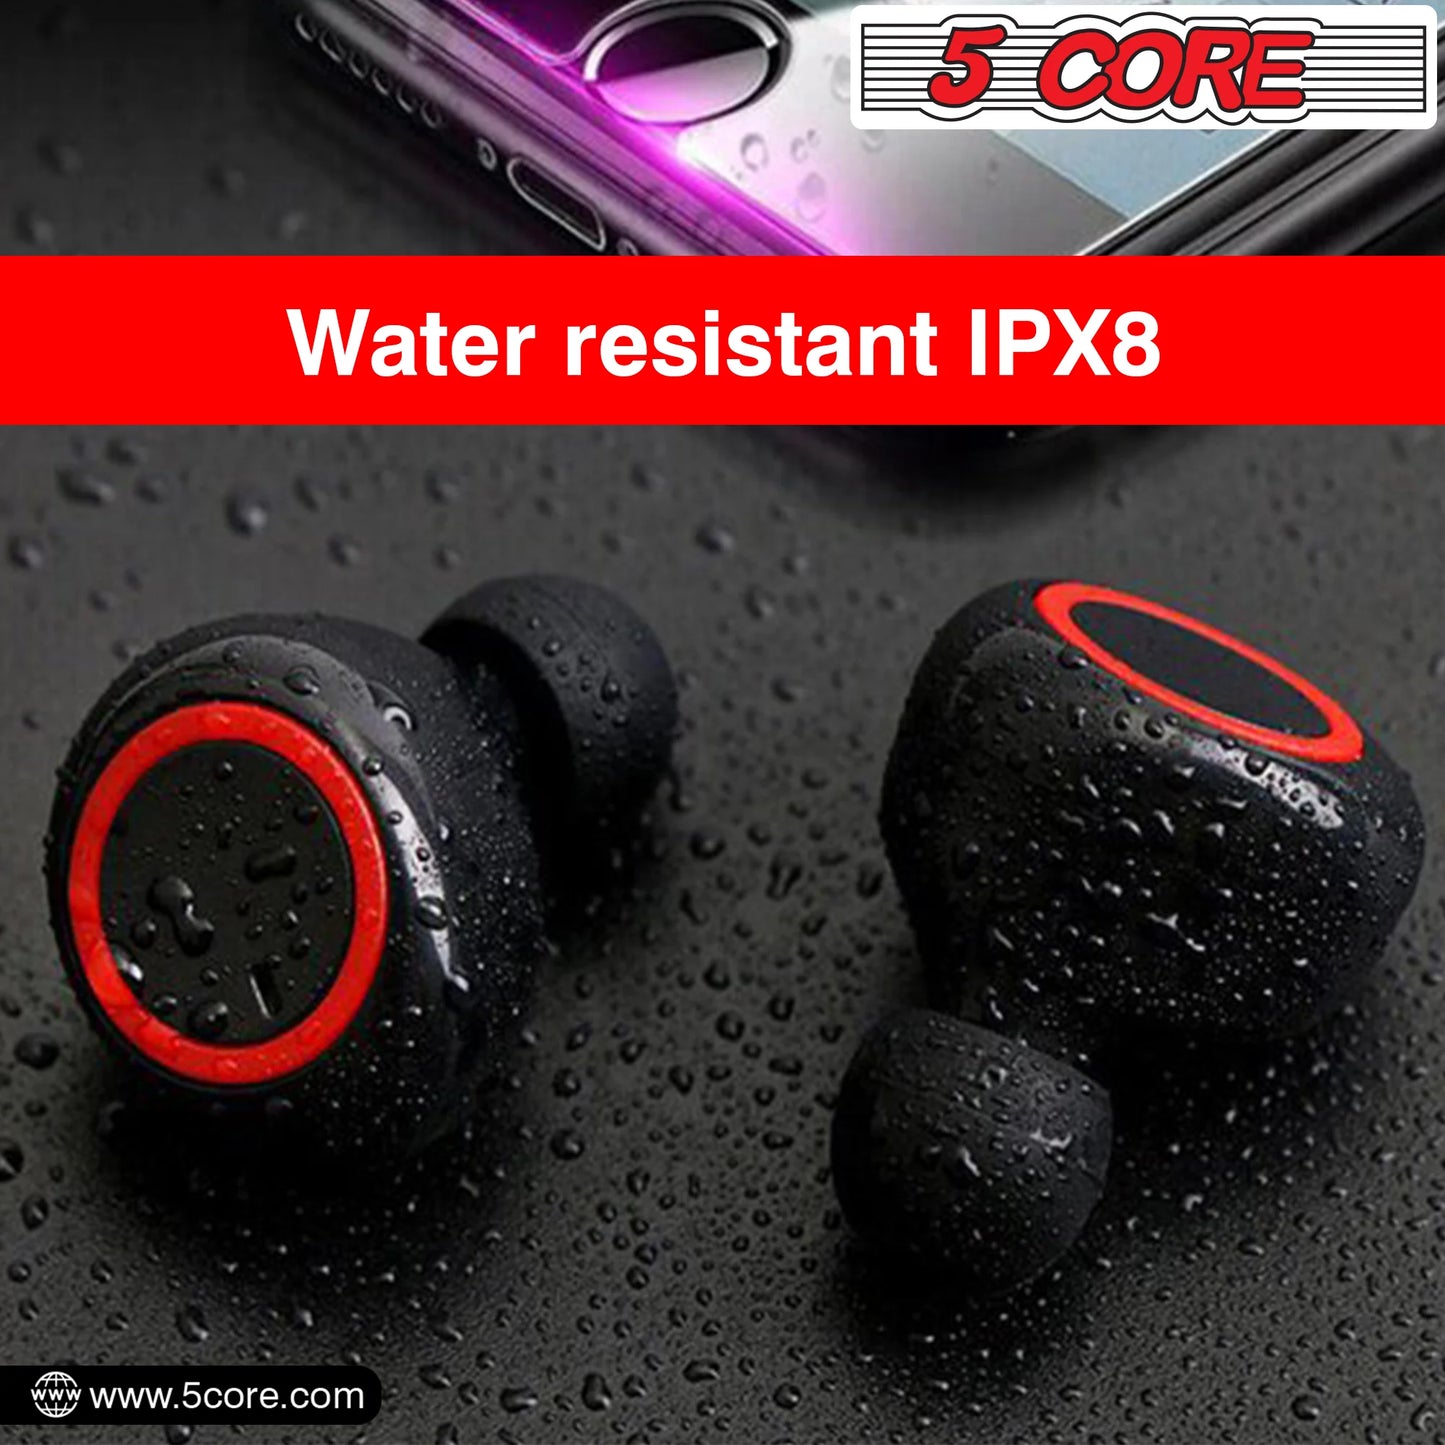 5 Core Wireless Earbuds Black 2 Pieces Noise Canceling Headphones Wireless Bluetooth 5.0 Powerful Beats and Clean Audio True Wireless Earbuds W Extra Long Playback Use as Gym Headphones Gaming Calling- EP01 2PCS